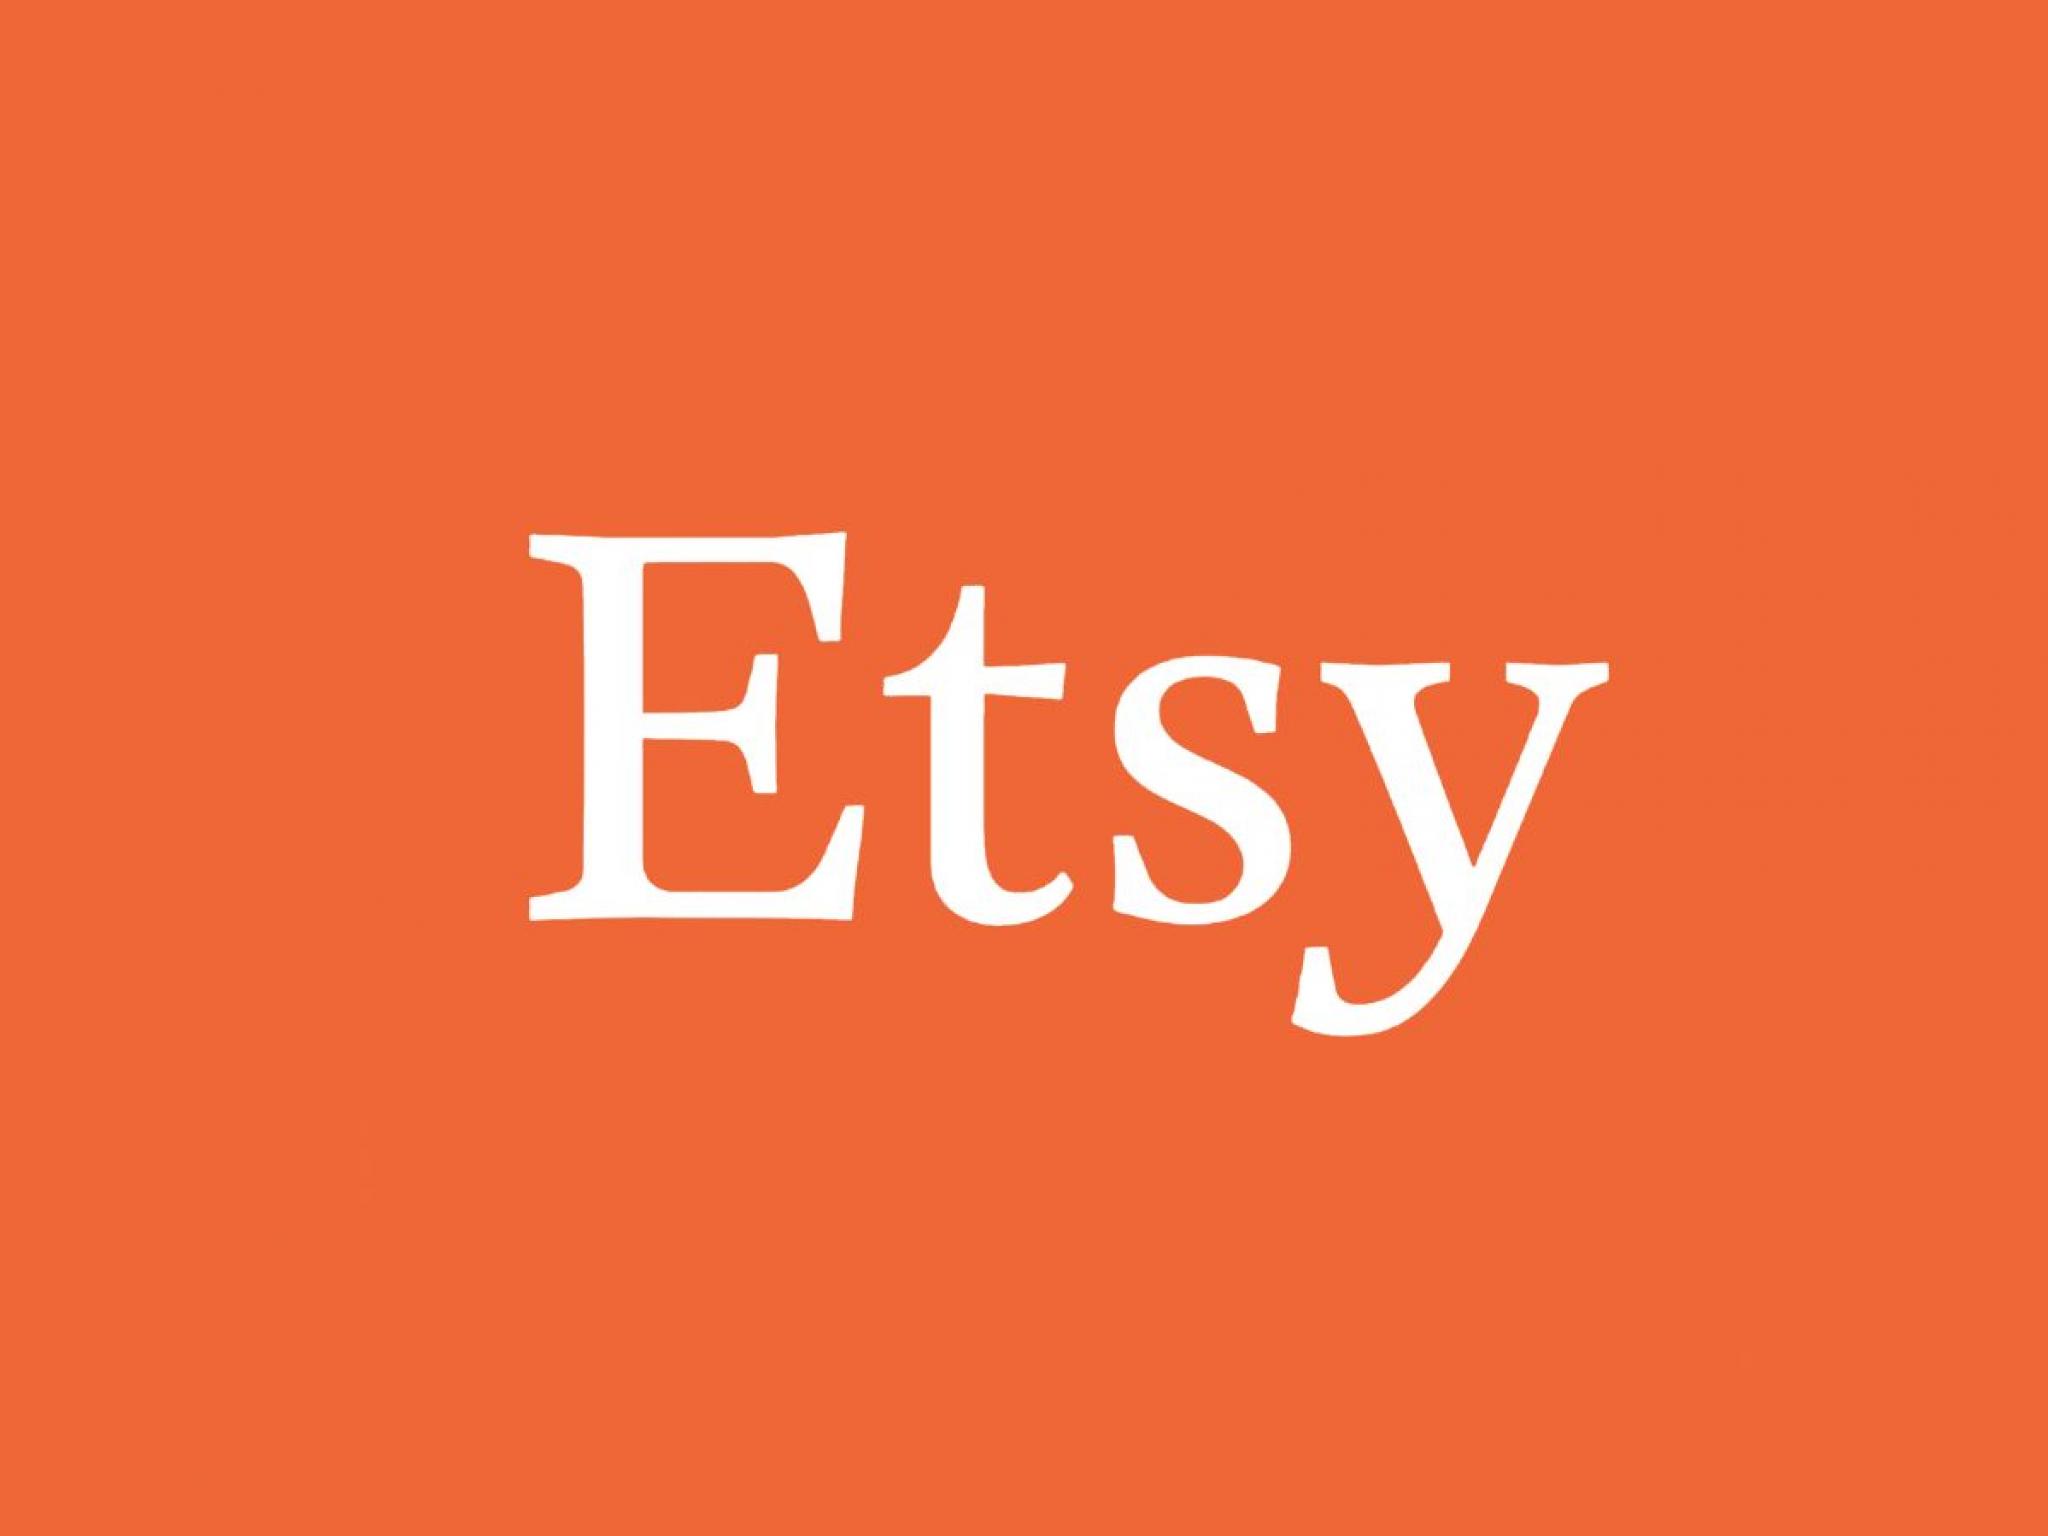  why-etsy-shares-are-trading-lower-by-around-8-here-are-other-stocks-moving-in-thursdays-mid-day-session 